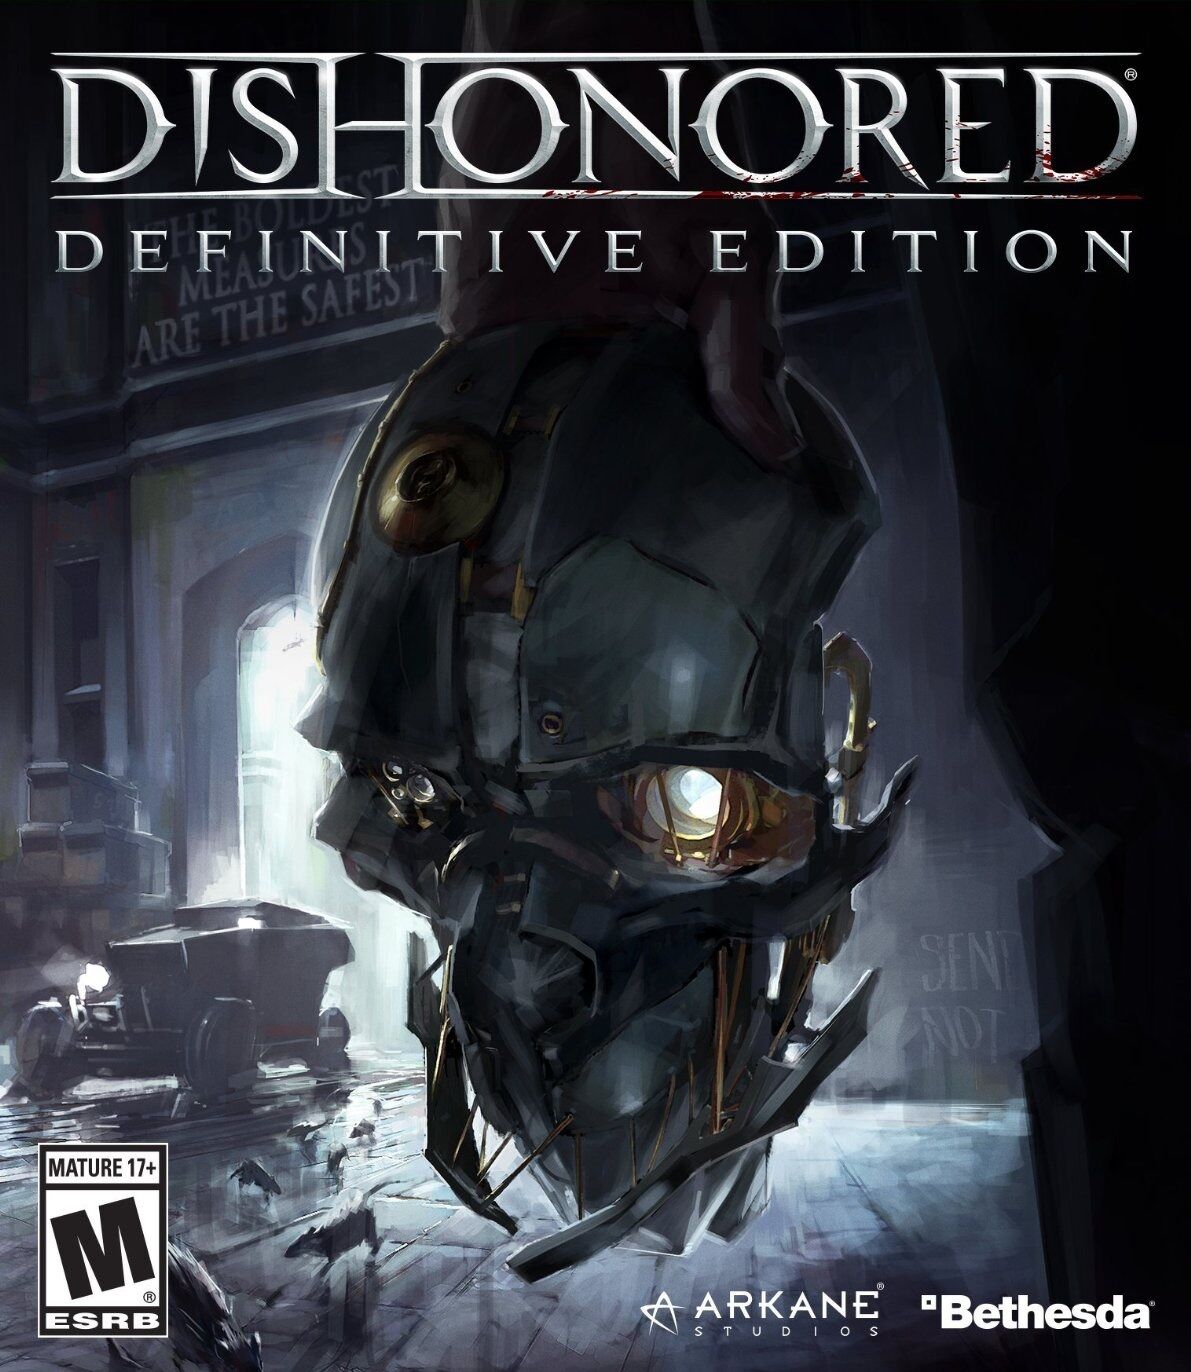 Breaking Down The New And Enhanced Powers Of Dishonored 2 - Game Informer